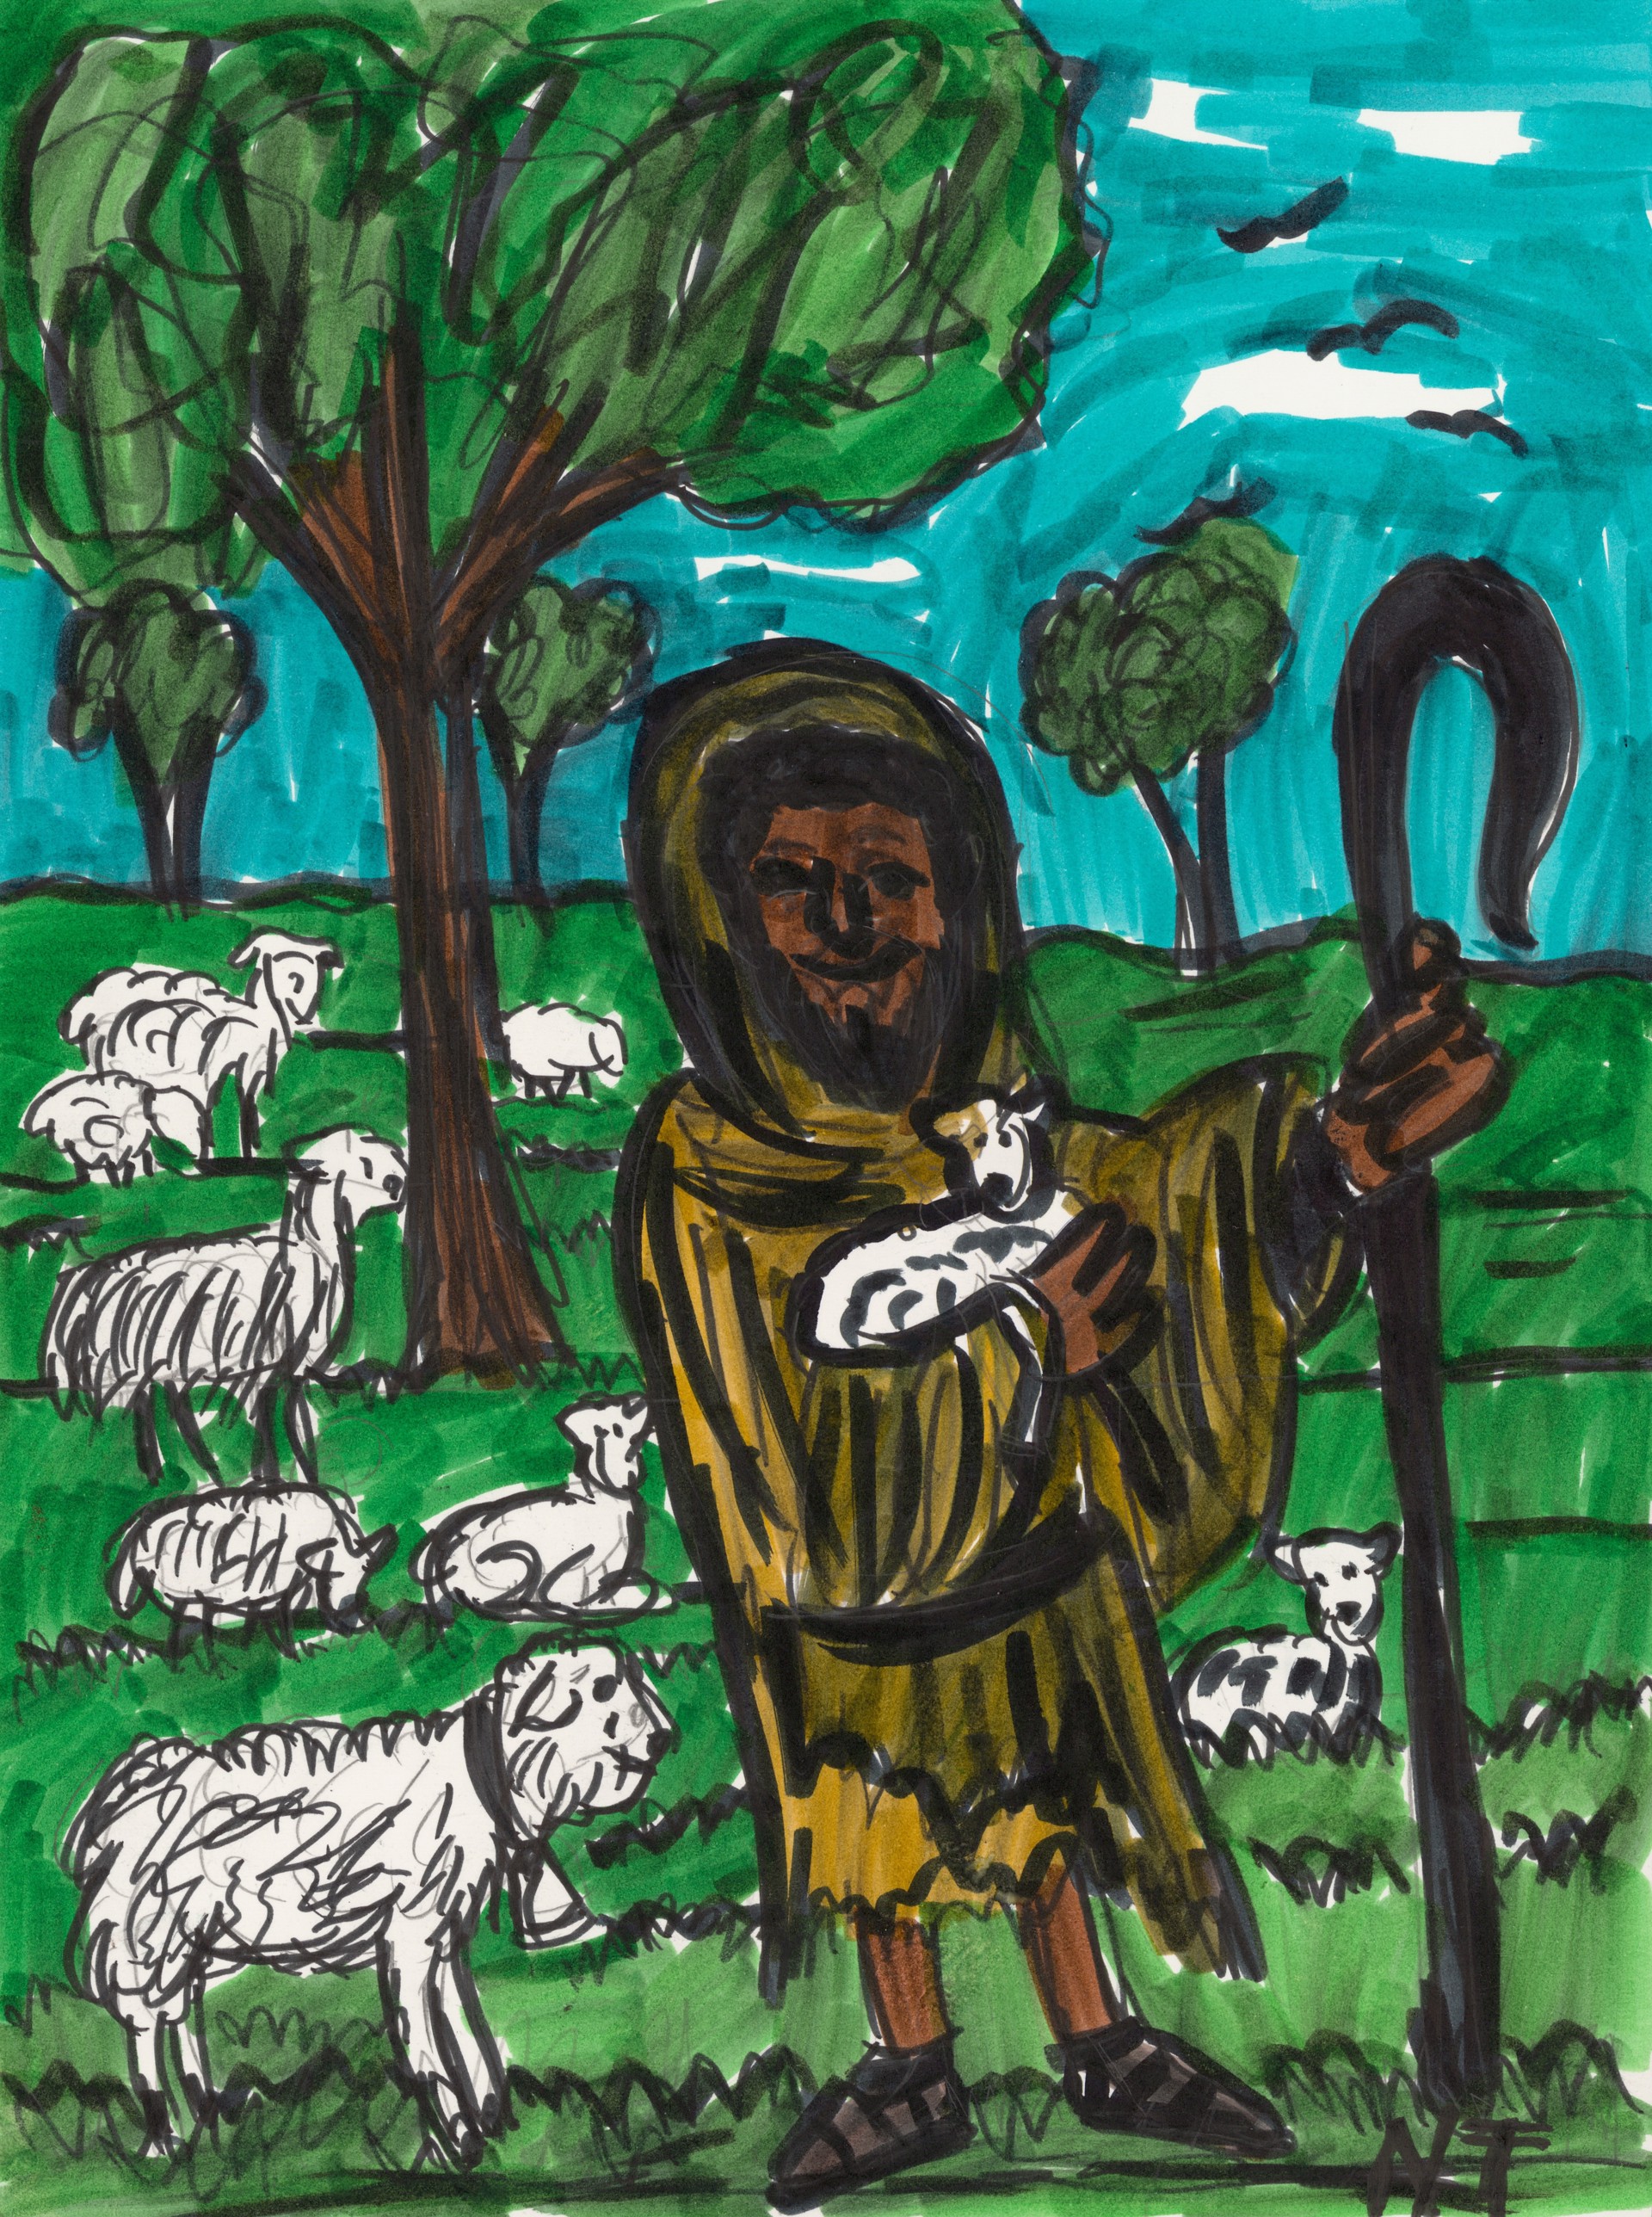 Jesus and the Lamb by Nonja Tiller